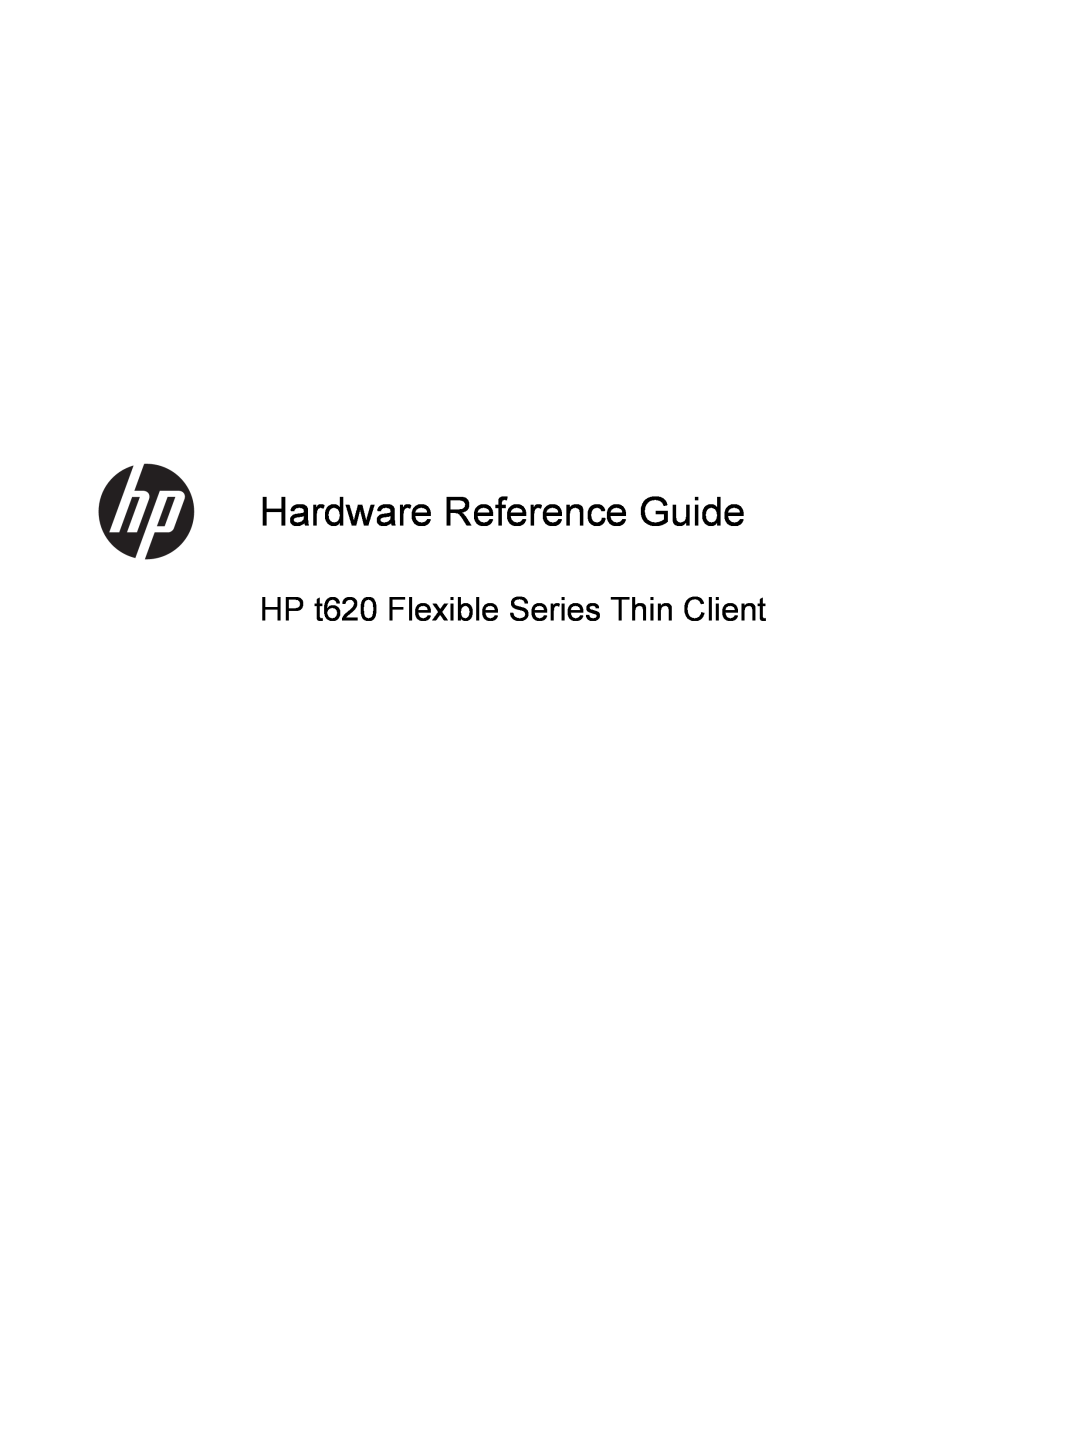 HP ZBook 14 Mobile manual Hardware Reference Guide, HP t620 Flexible Series Thin Client 